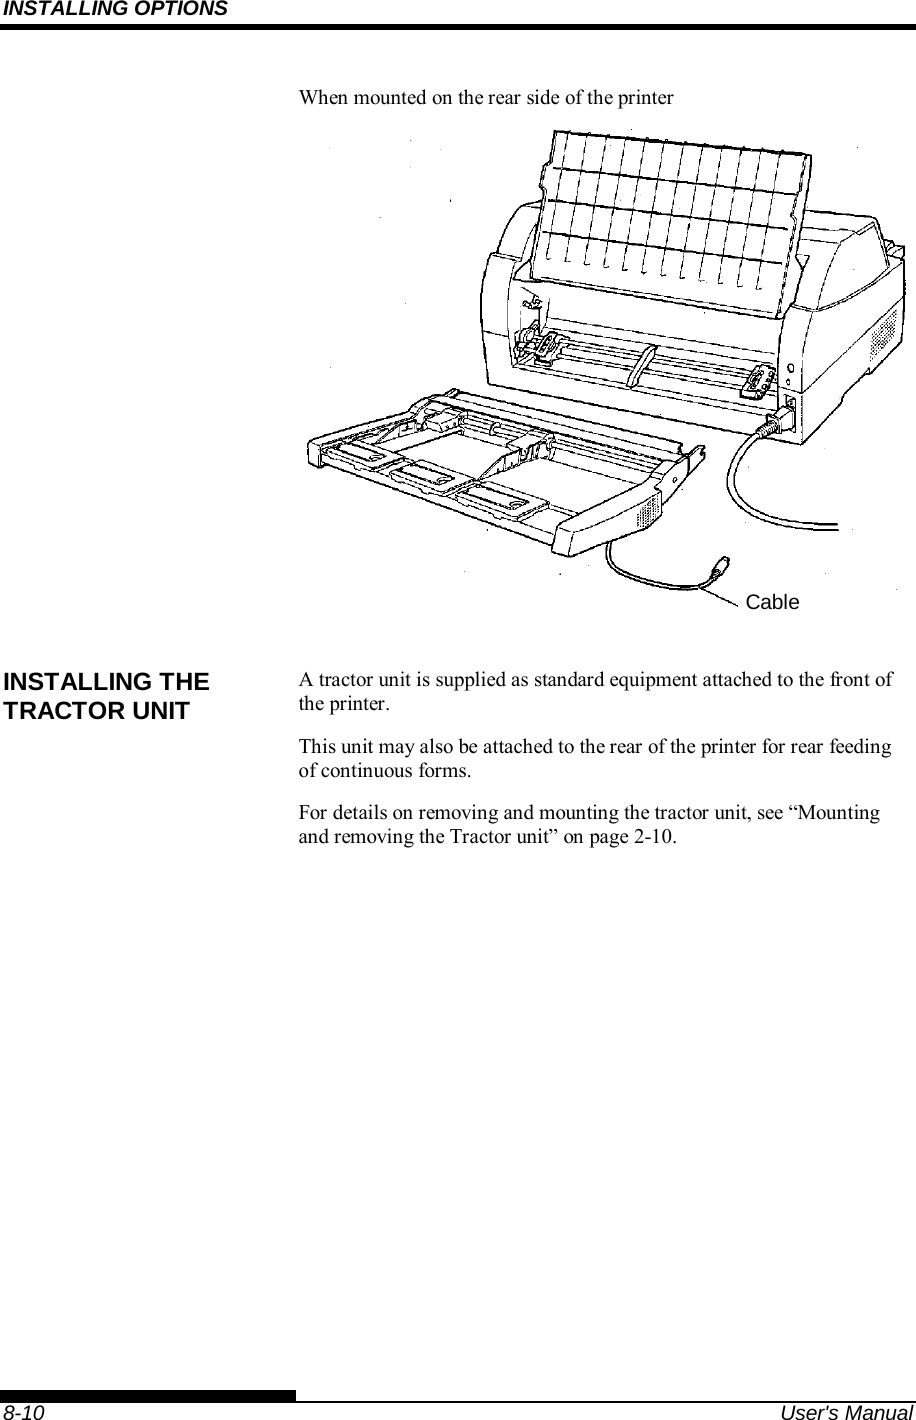 INSTALLING OPTIONS    8-10  User&apos;s Manual When mounted on the rear side of the printer   A tractor unit is supplied as standard equipment attached to the front of the printer.   This unit may also be attached to the rear of the printer for rear feeding of continuous forms. For details on removing and mounting the tractor unit, see “Mounting and removing the Tractor unit” on page 2-10.   INSTALLING THE TRACTOR UNIT Cable 